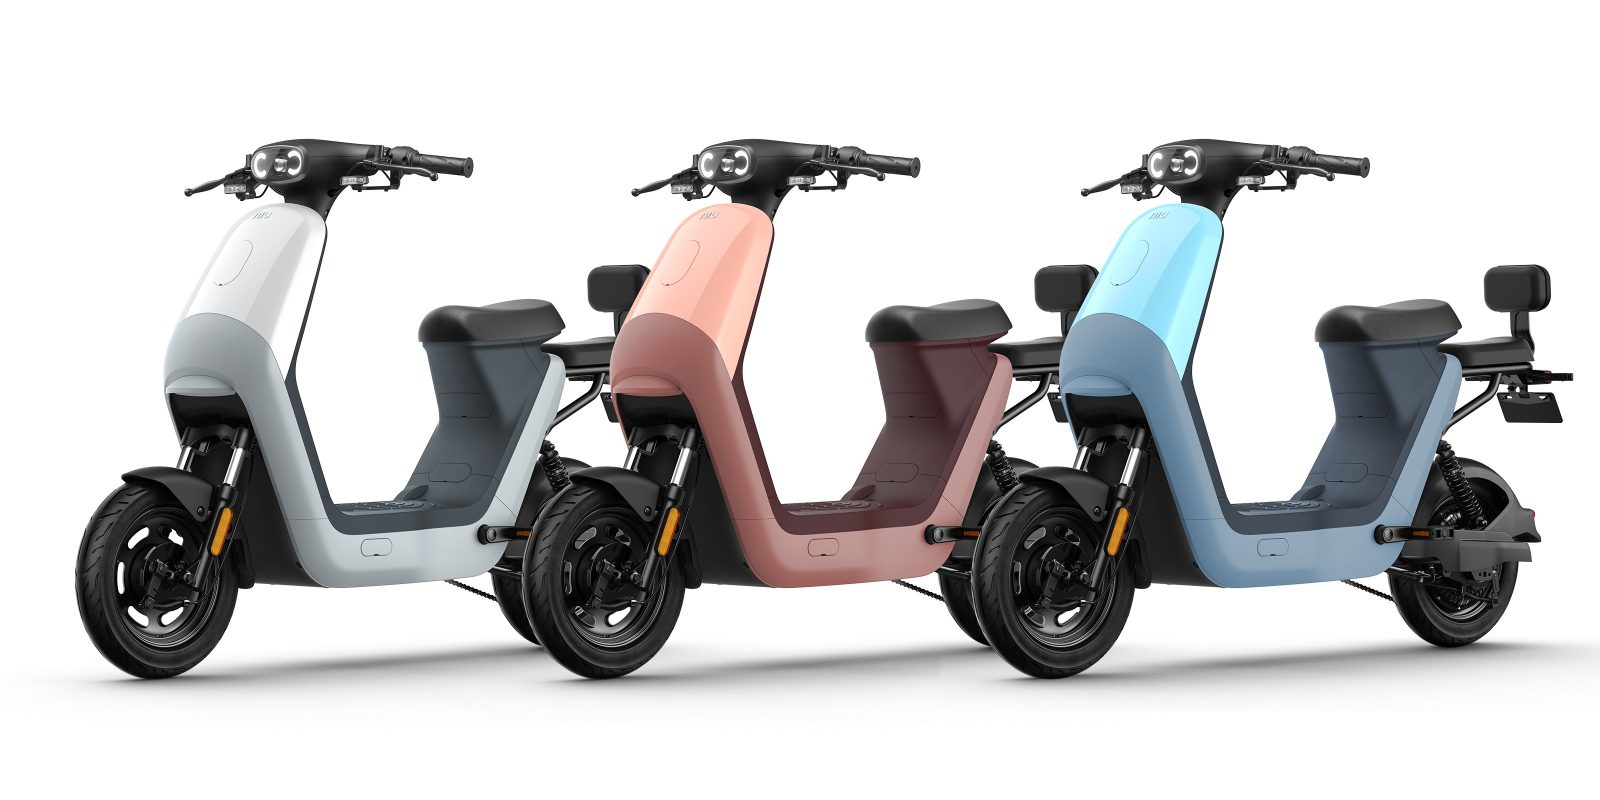 NIU's GOVA C0 is a cute seated electric scooter designed for female riders